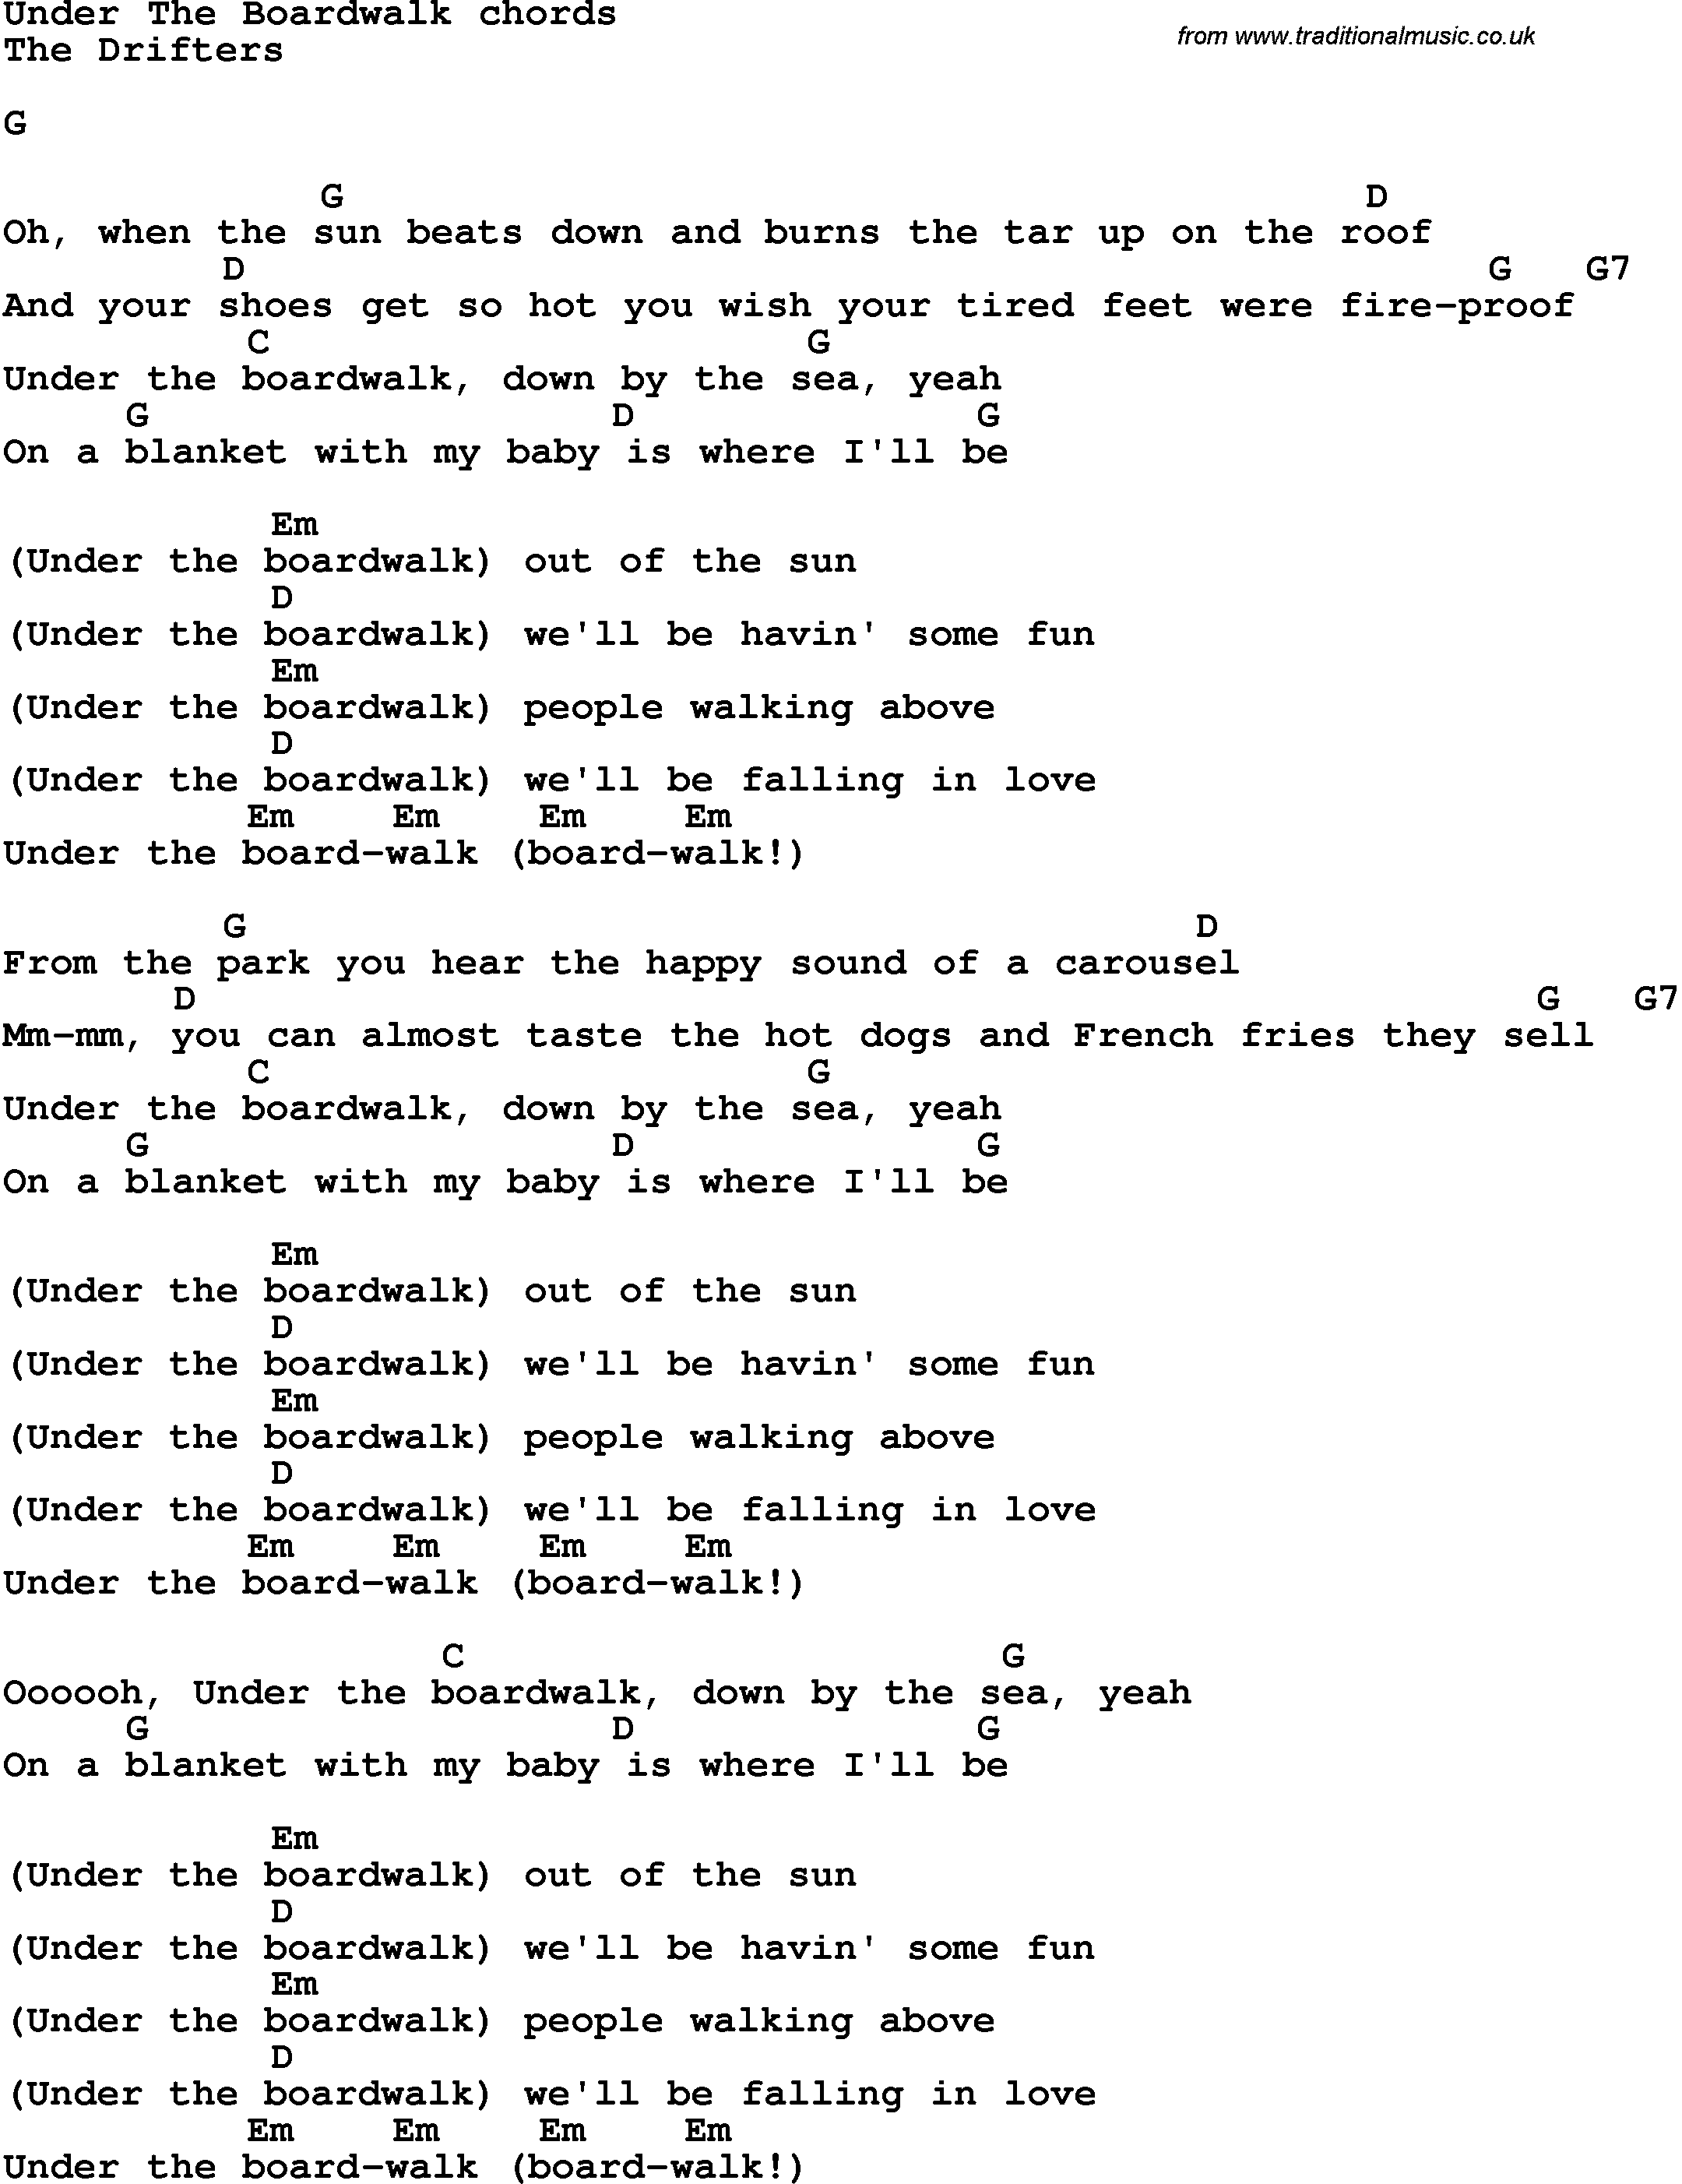 Song Lyrics with guitar chords for Under The Boardwalk - The Drifters